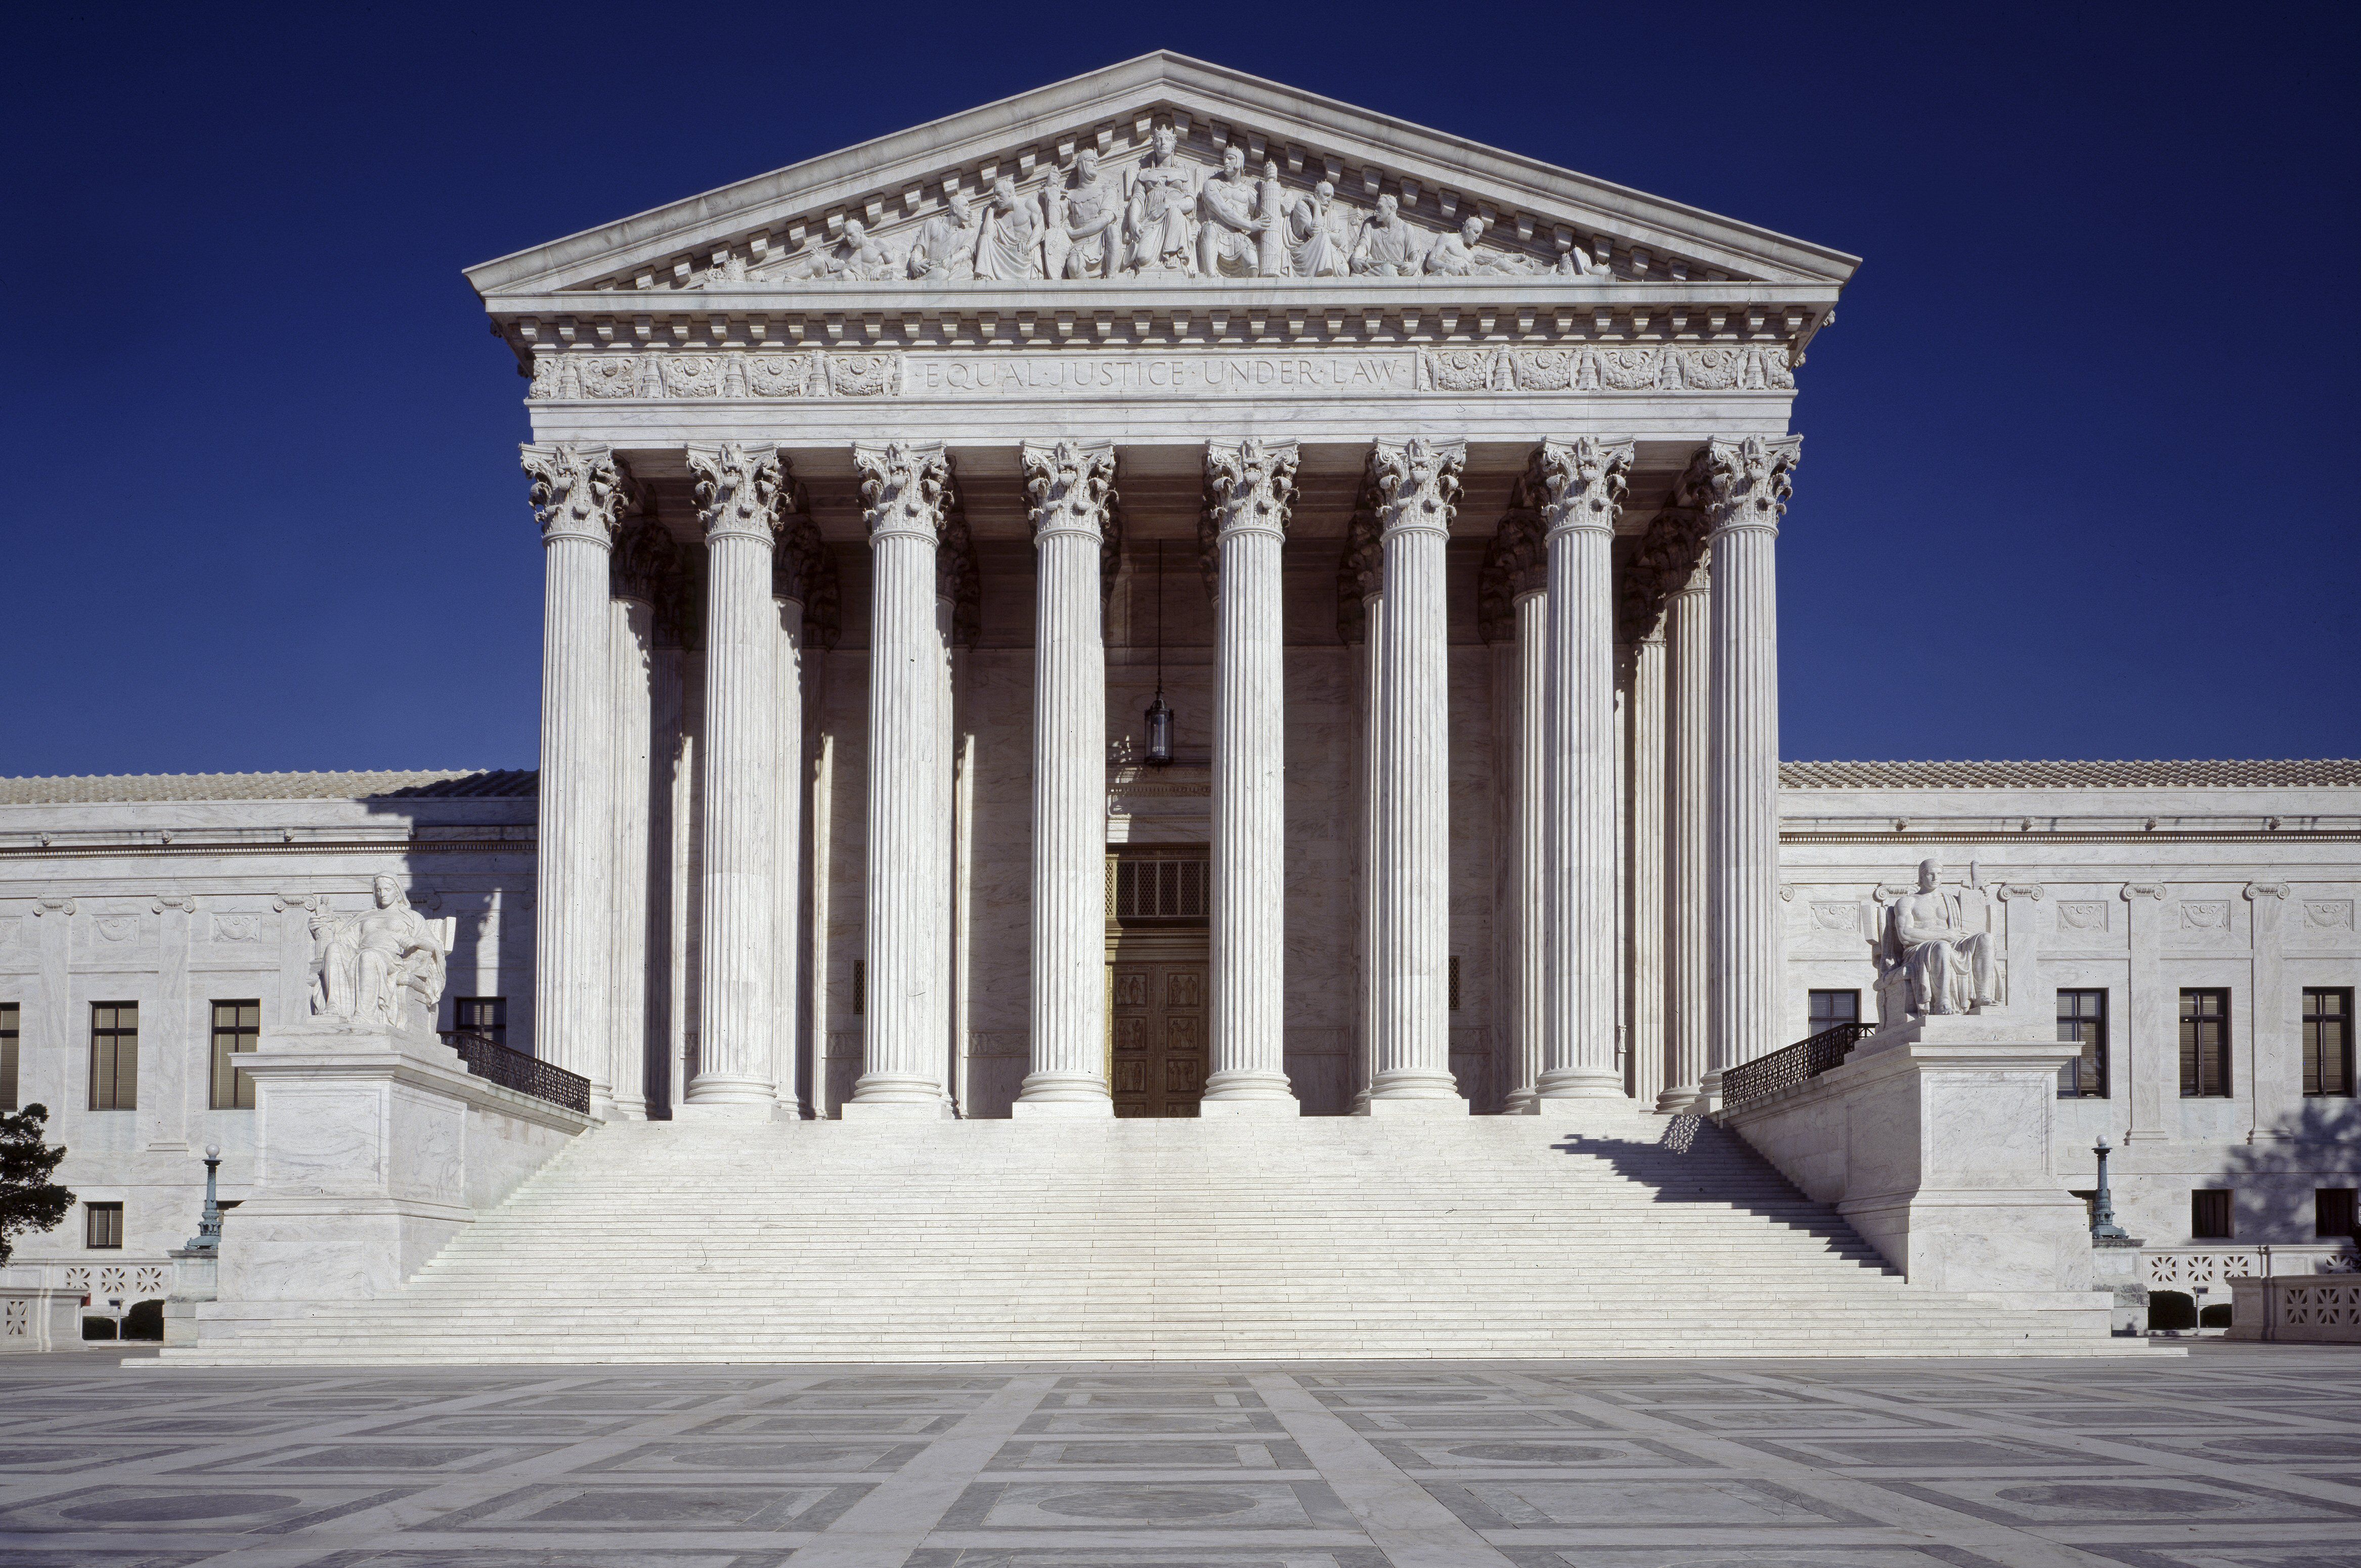 University announces policy changes following SCOTUS affirmative